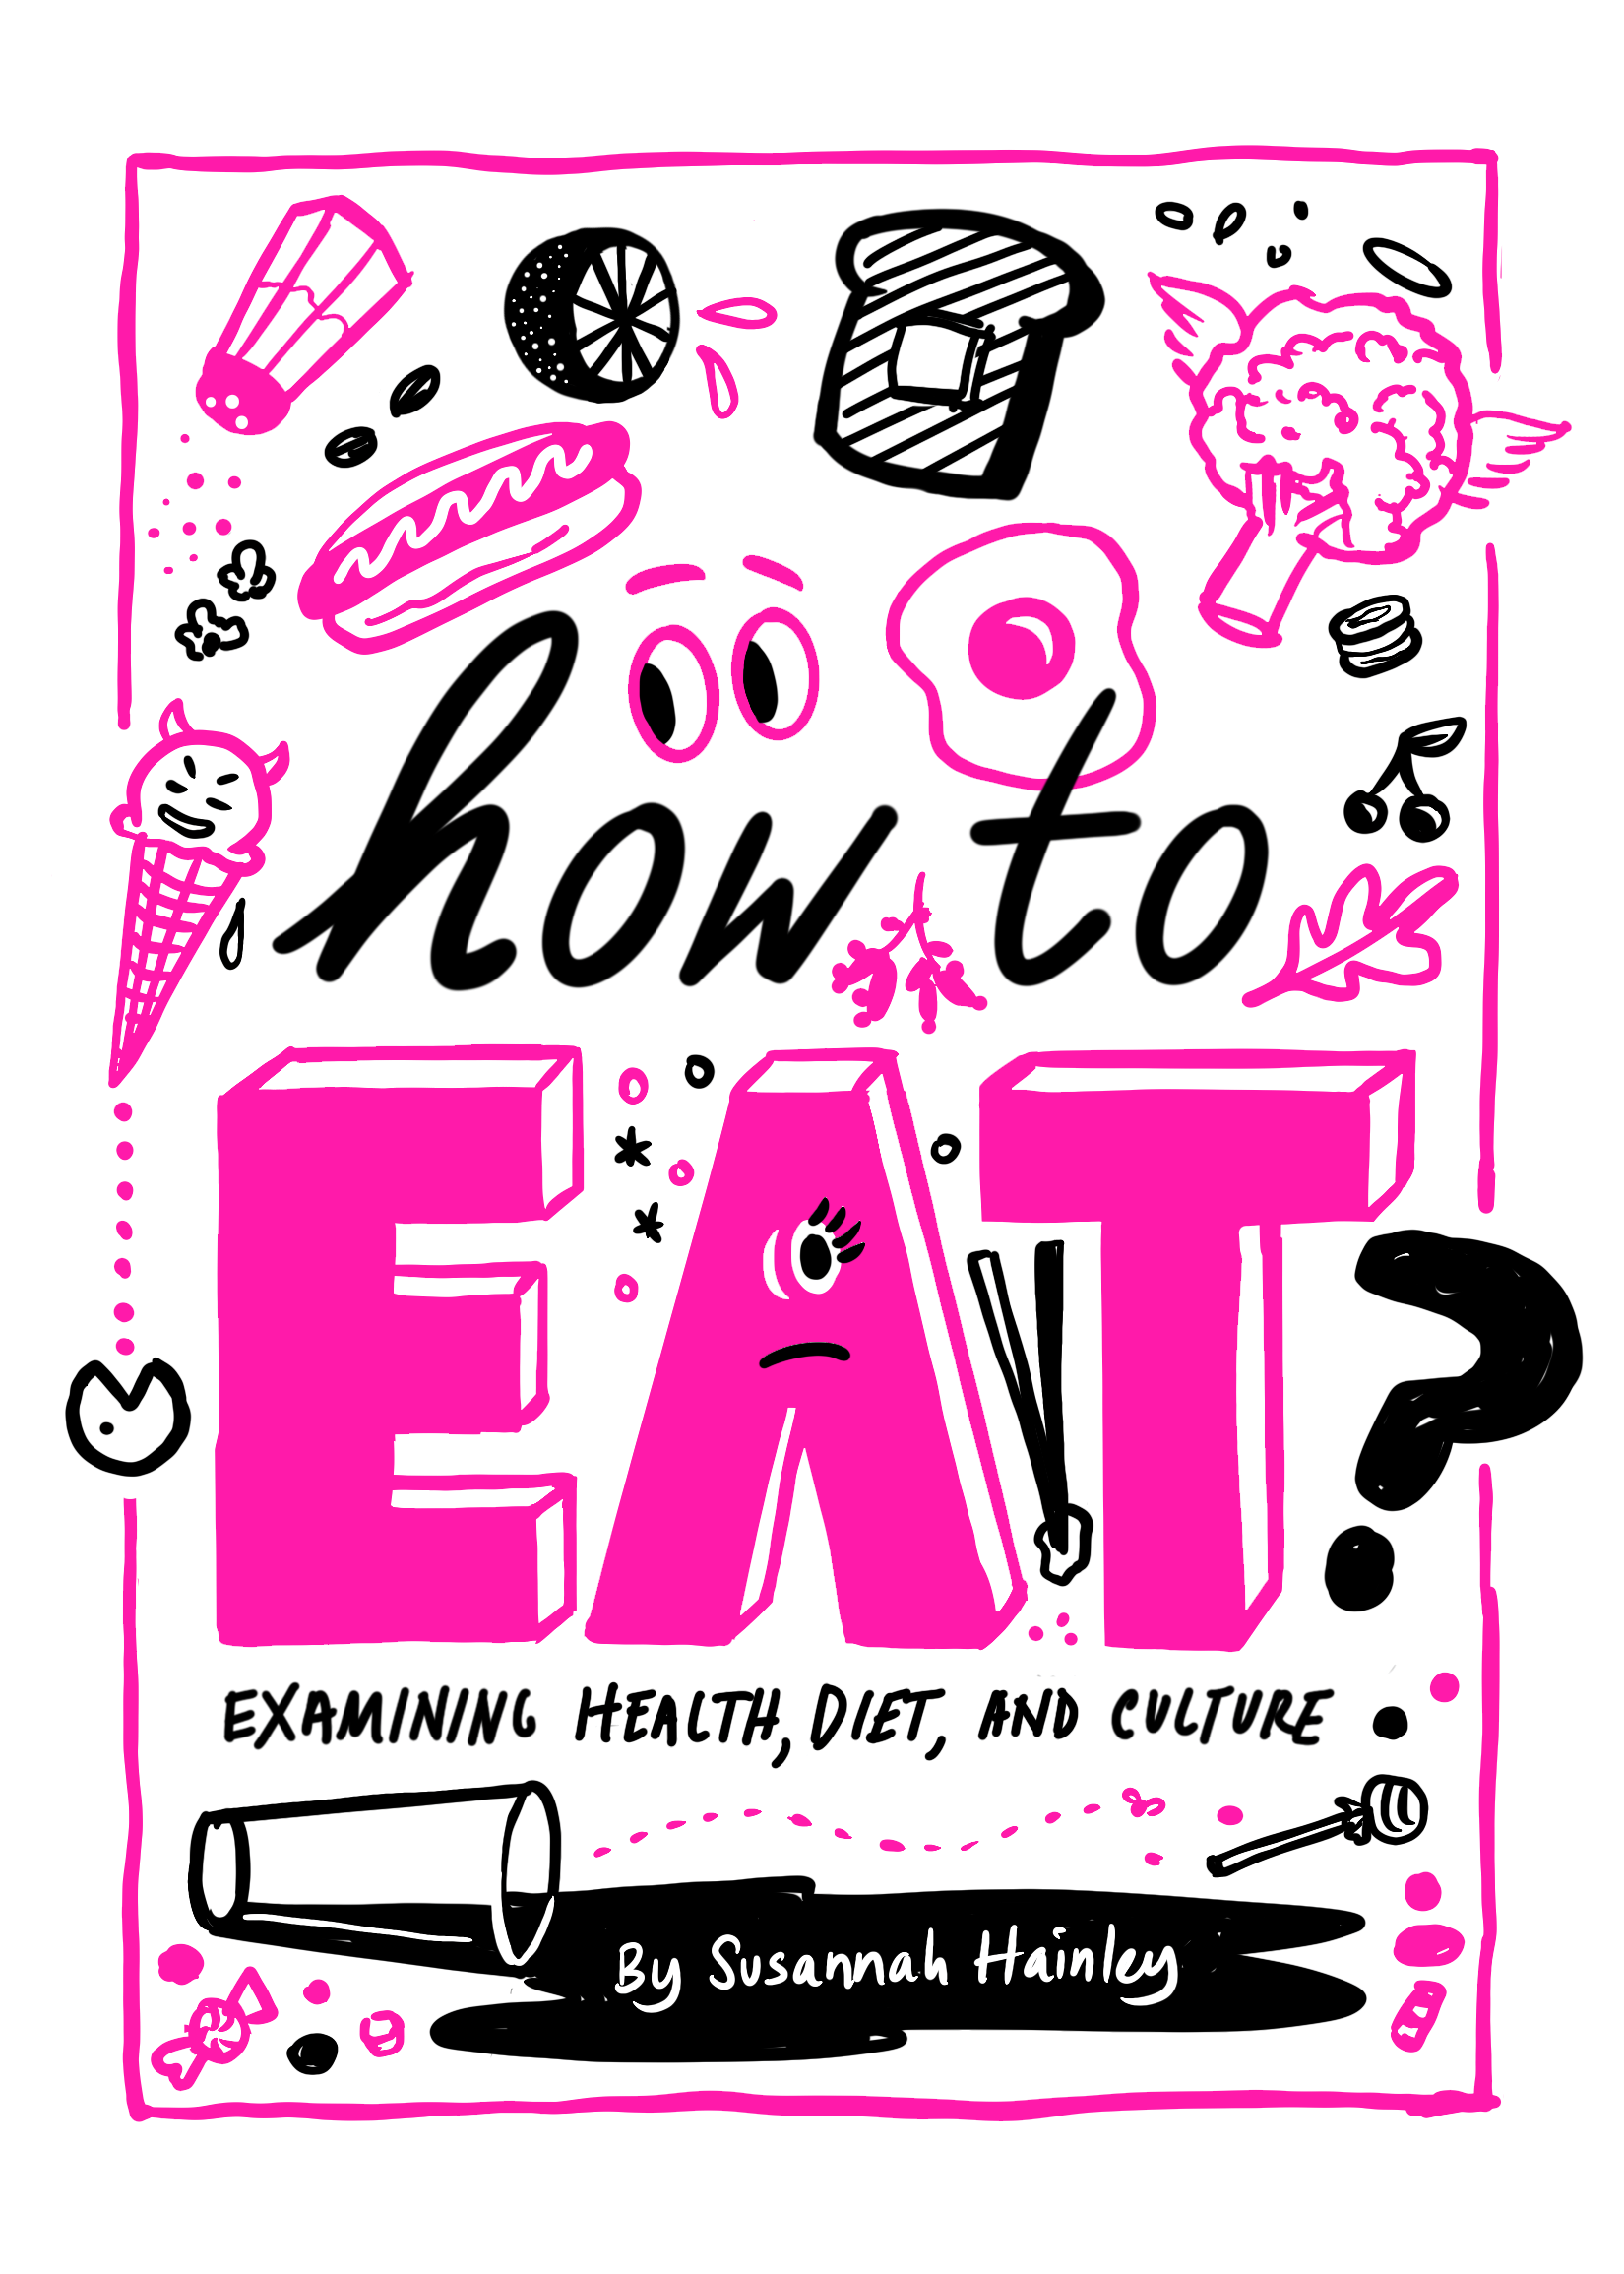 How to Eat by Susannah Hainley